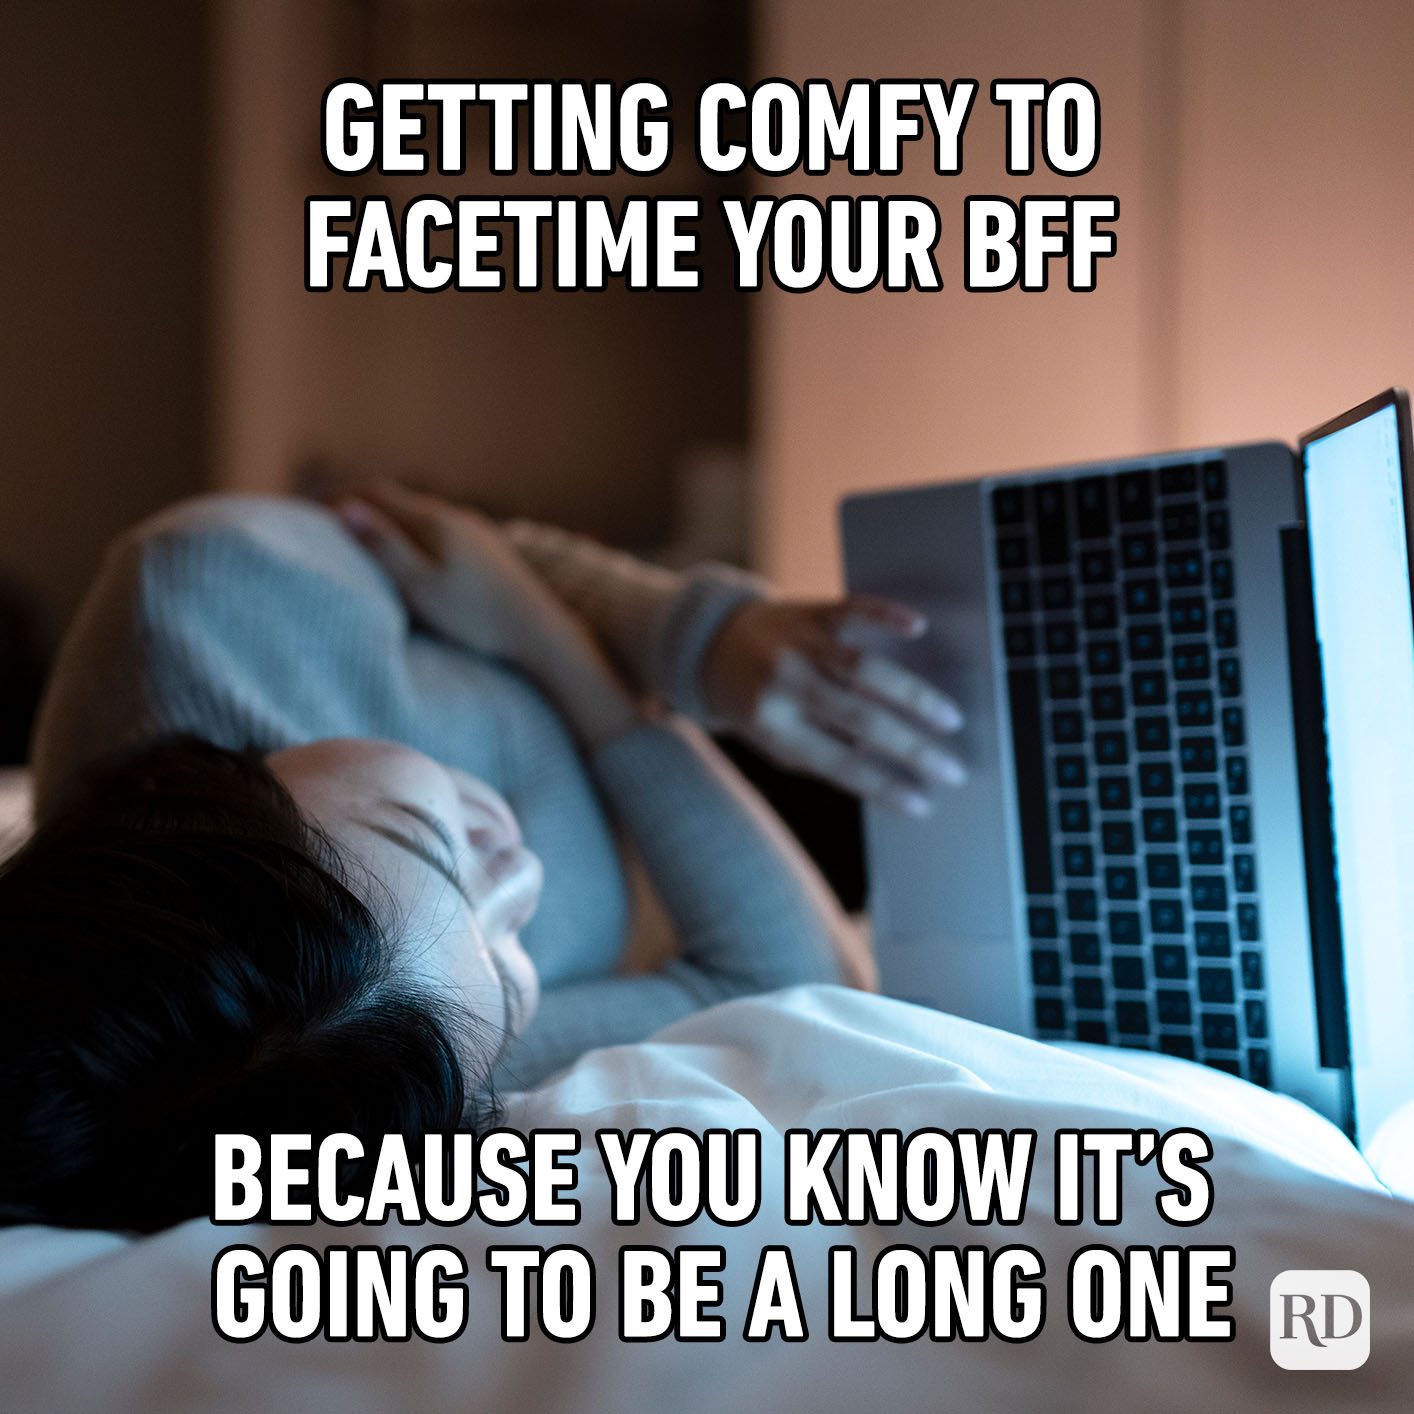 Meme text: Getting comfy to FaceTime your BFF because you know it’s going to be a long one